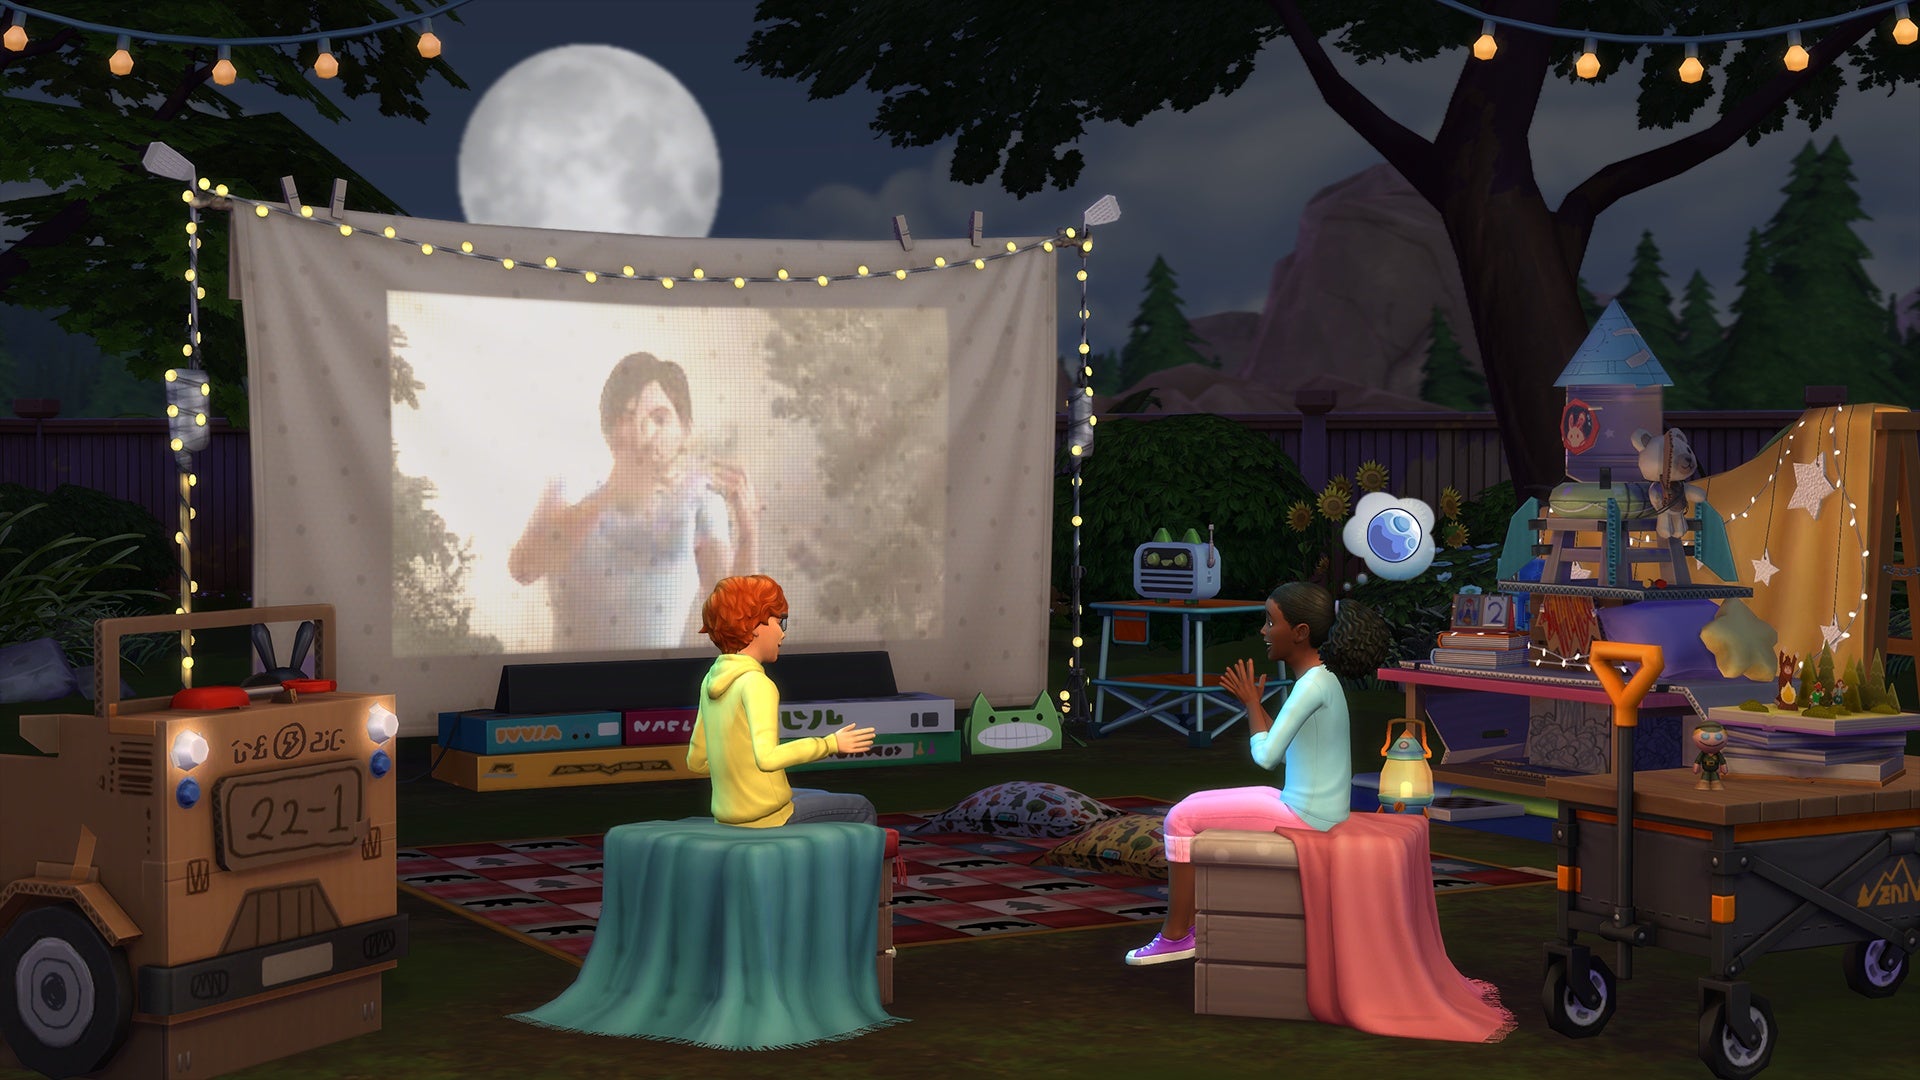 Two children in The Sims 4 sat in a back garden surrounded by outdoor camping gear in front of a sheet with a movie projected onto it at night.